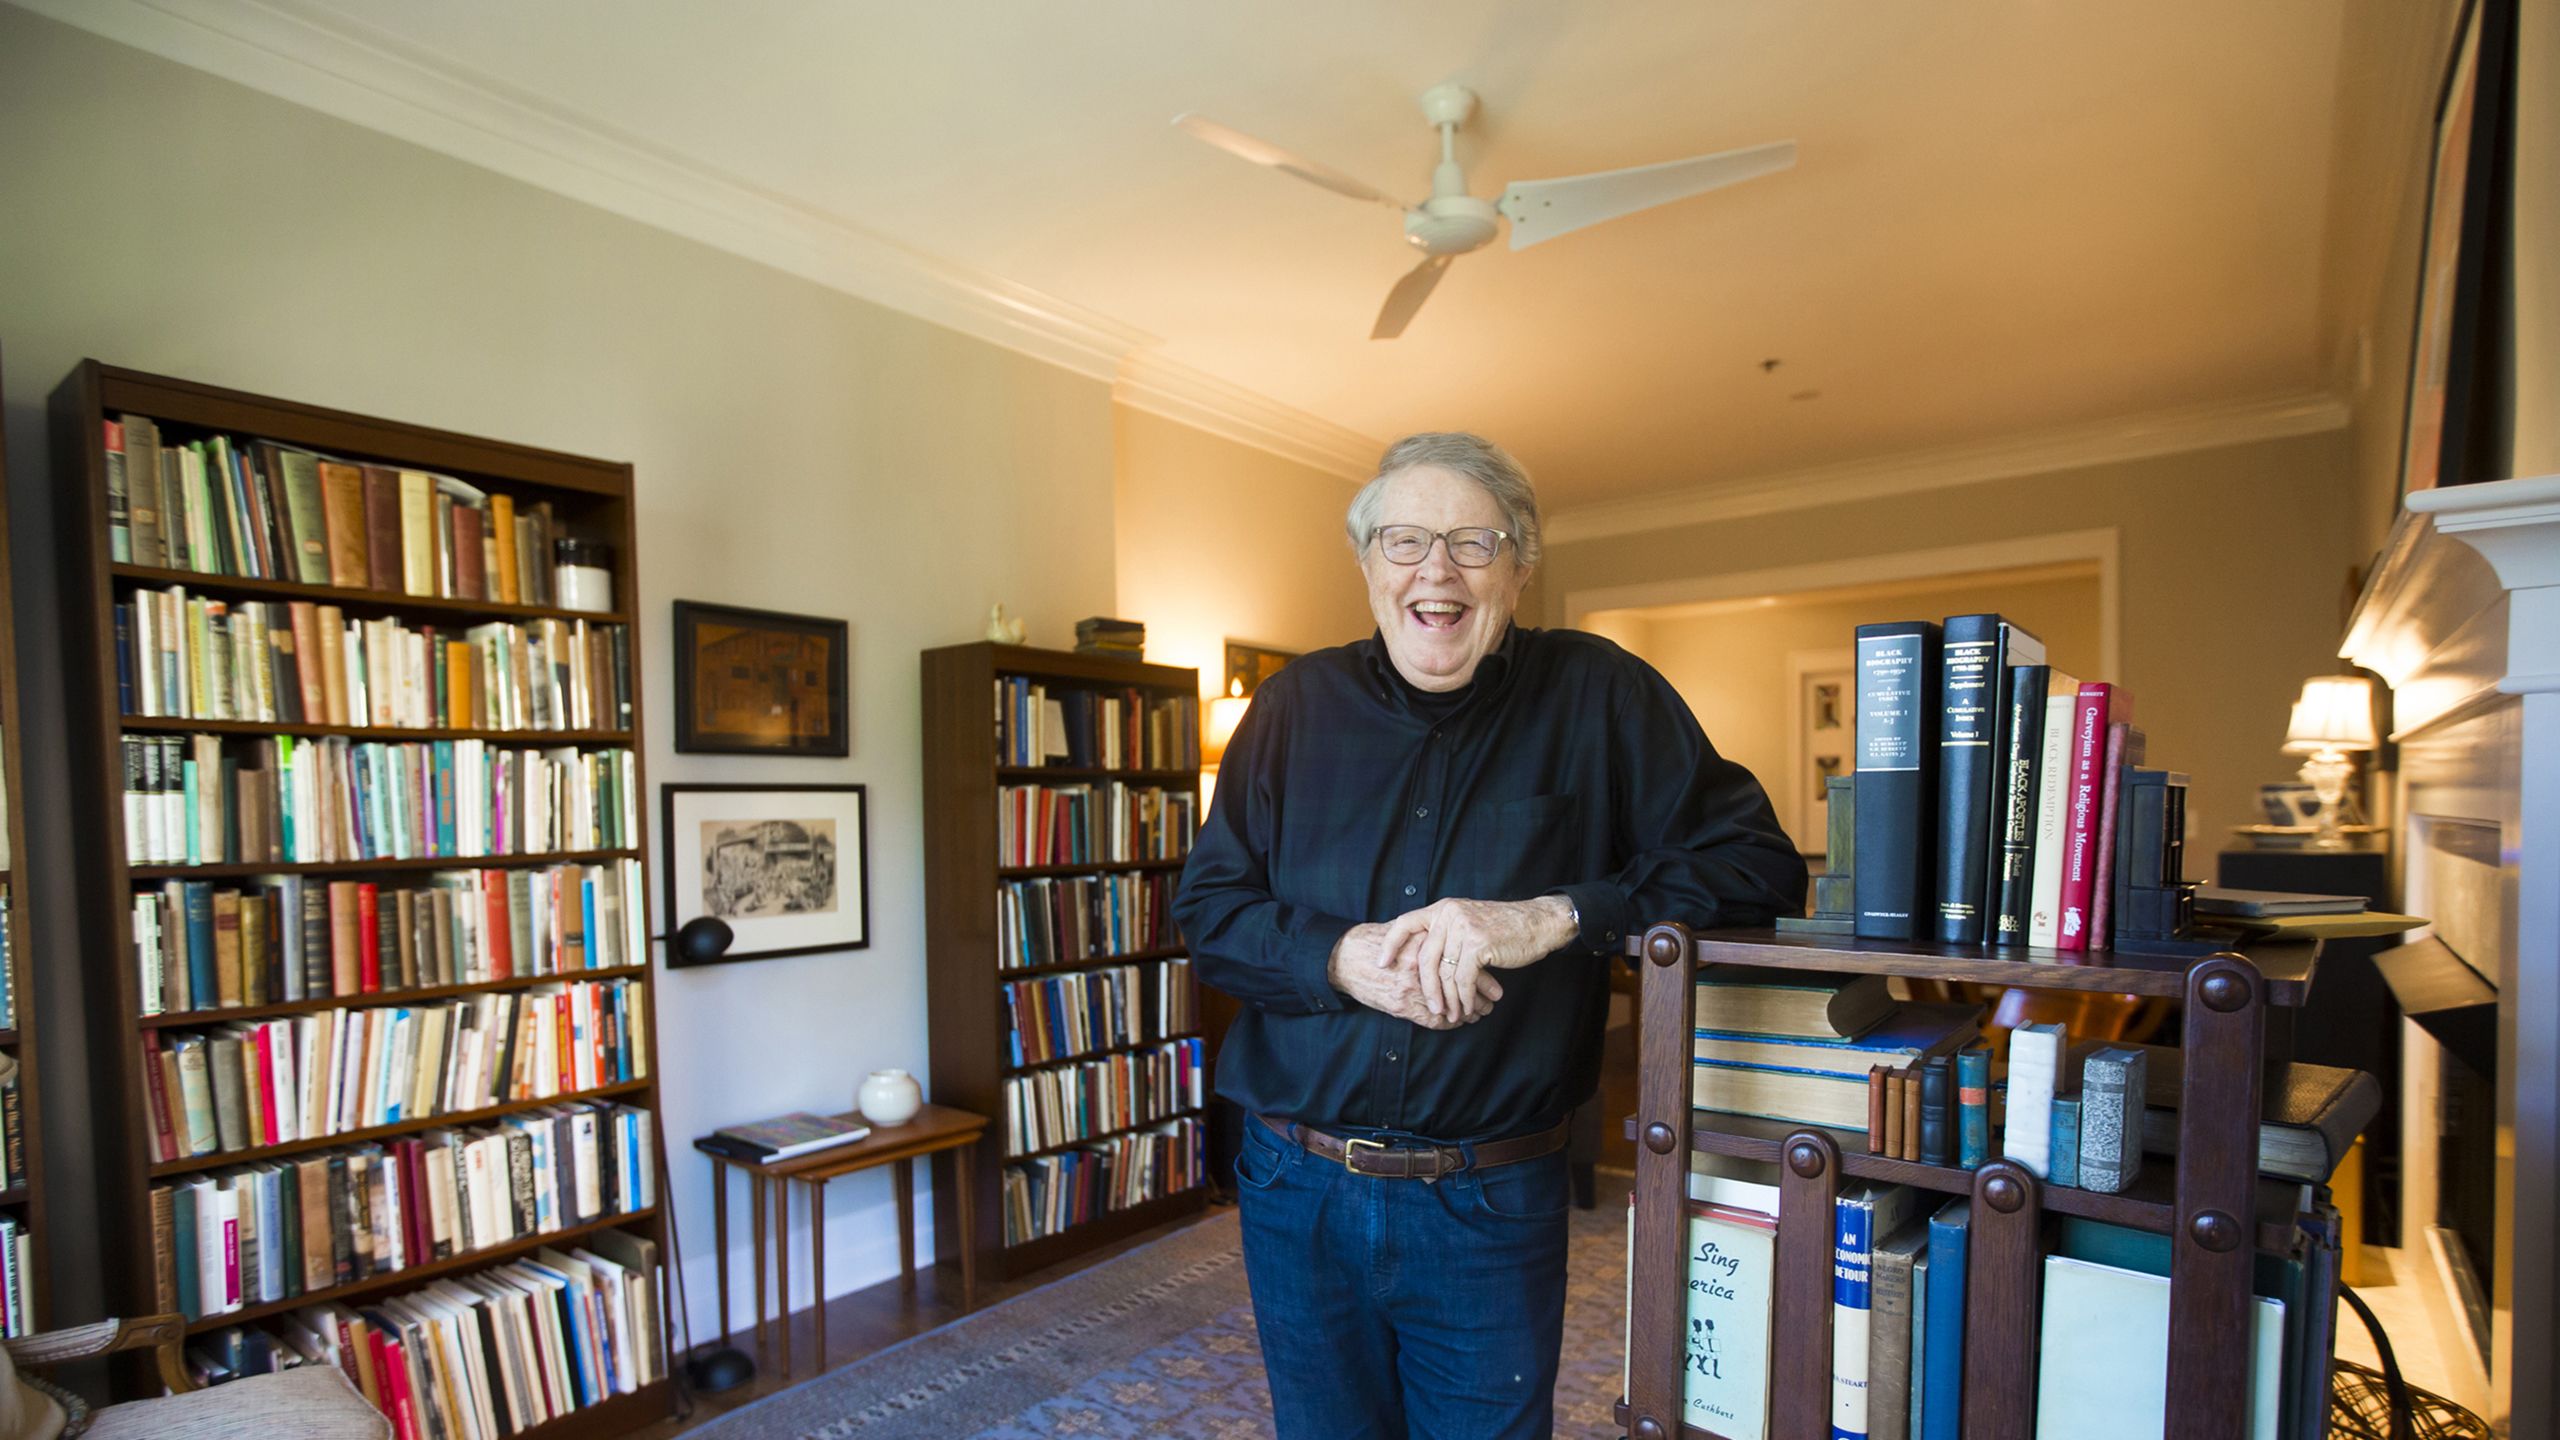 Burkett laughs while standing in the library of his home with his elbow resting on a turning bookcase